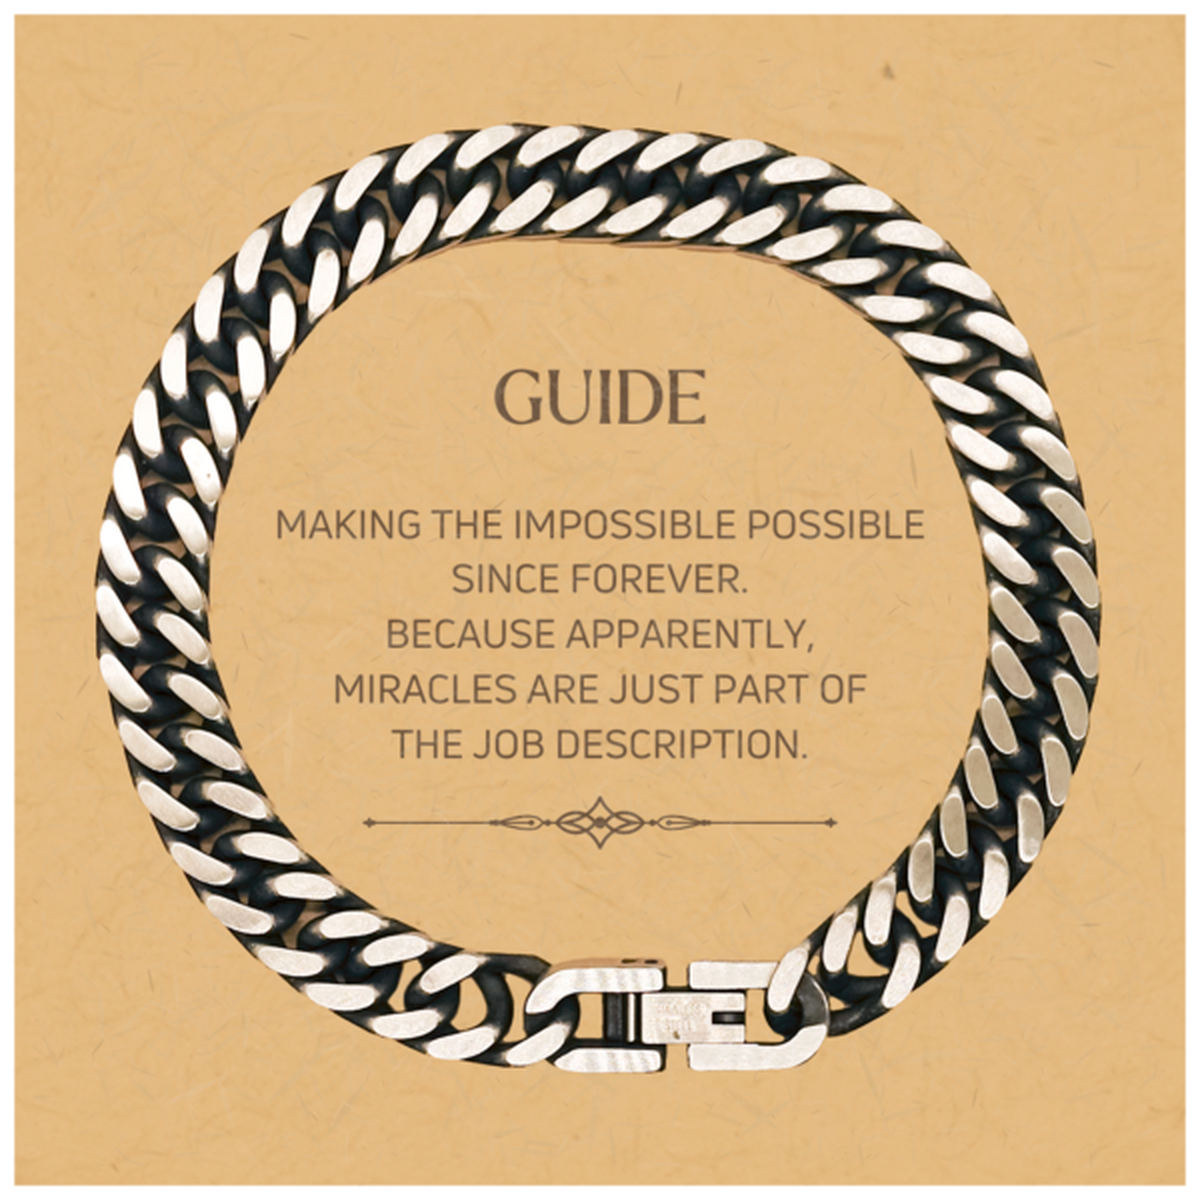 Funny Guide Gifts, Miracles are just part of the job description, Inspirational Birthday Christmas Cuban Link Chain Bracelet For Guide, Men, Women, Coworkers, Friends, Boss